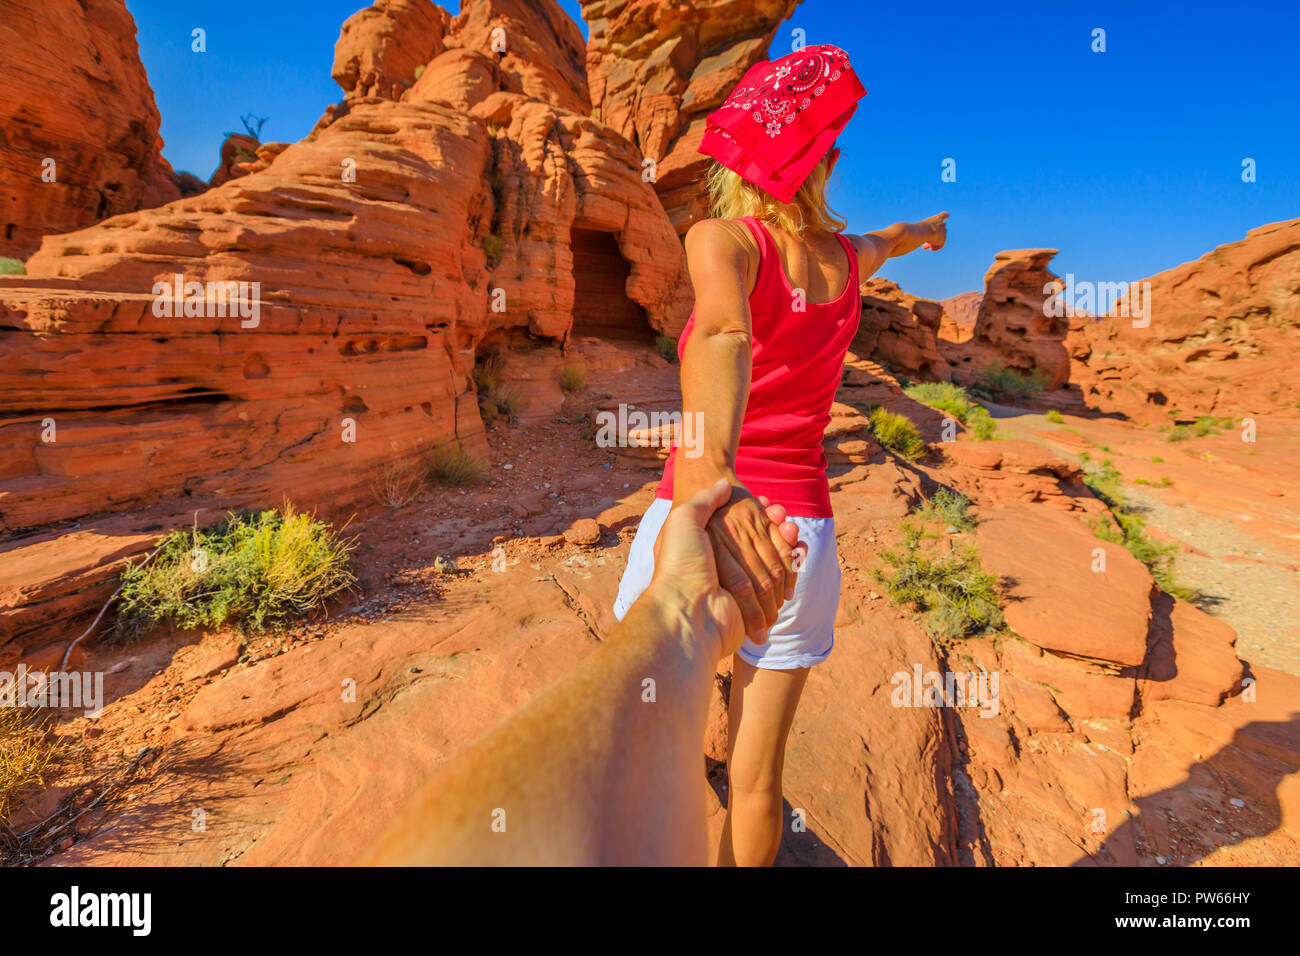 Follow me, young sporty girl holding hands at Firecave, the rock formations in Valley of Fire State Park, Nevada, USA. Concept of the journey. Tourist traveler holding man by hand. Stock Photo